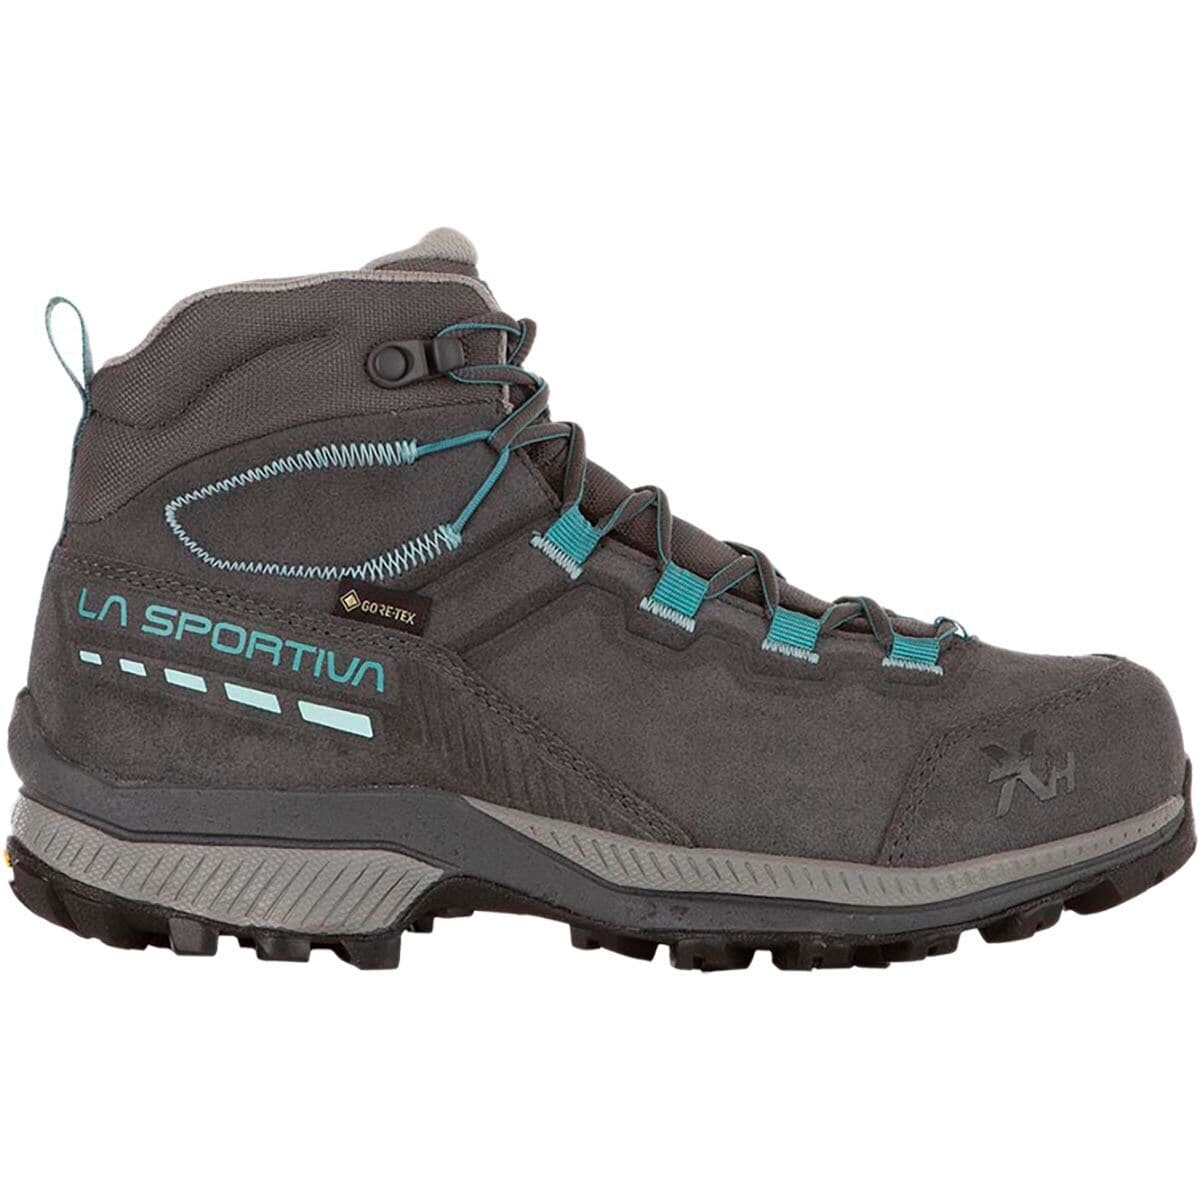 TX Hike Mid Leather GTX Hiking Boot - Women